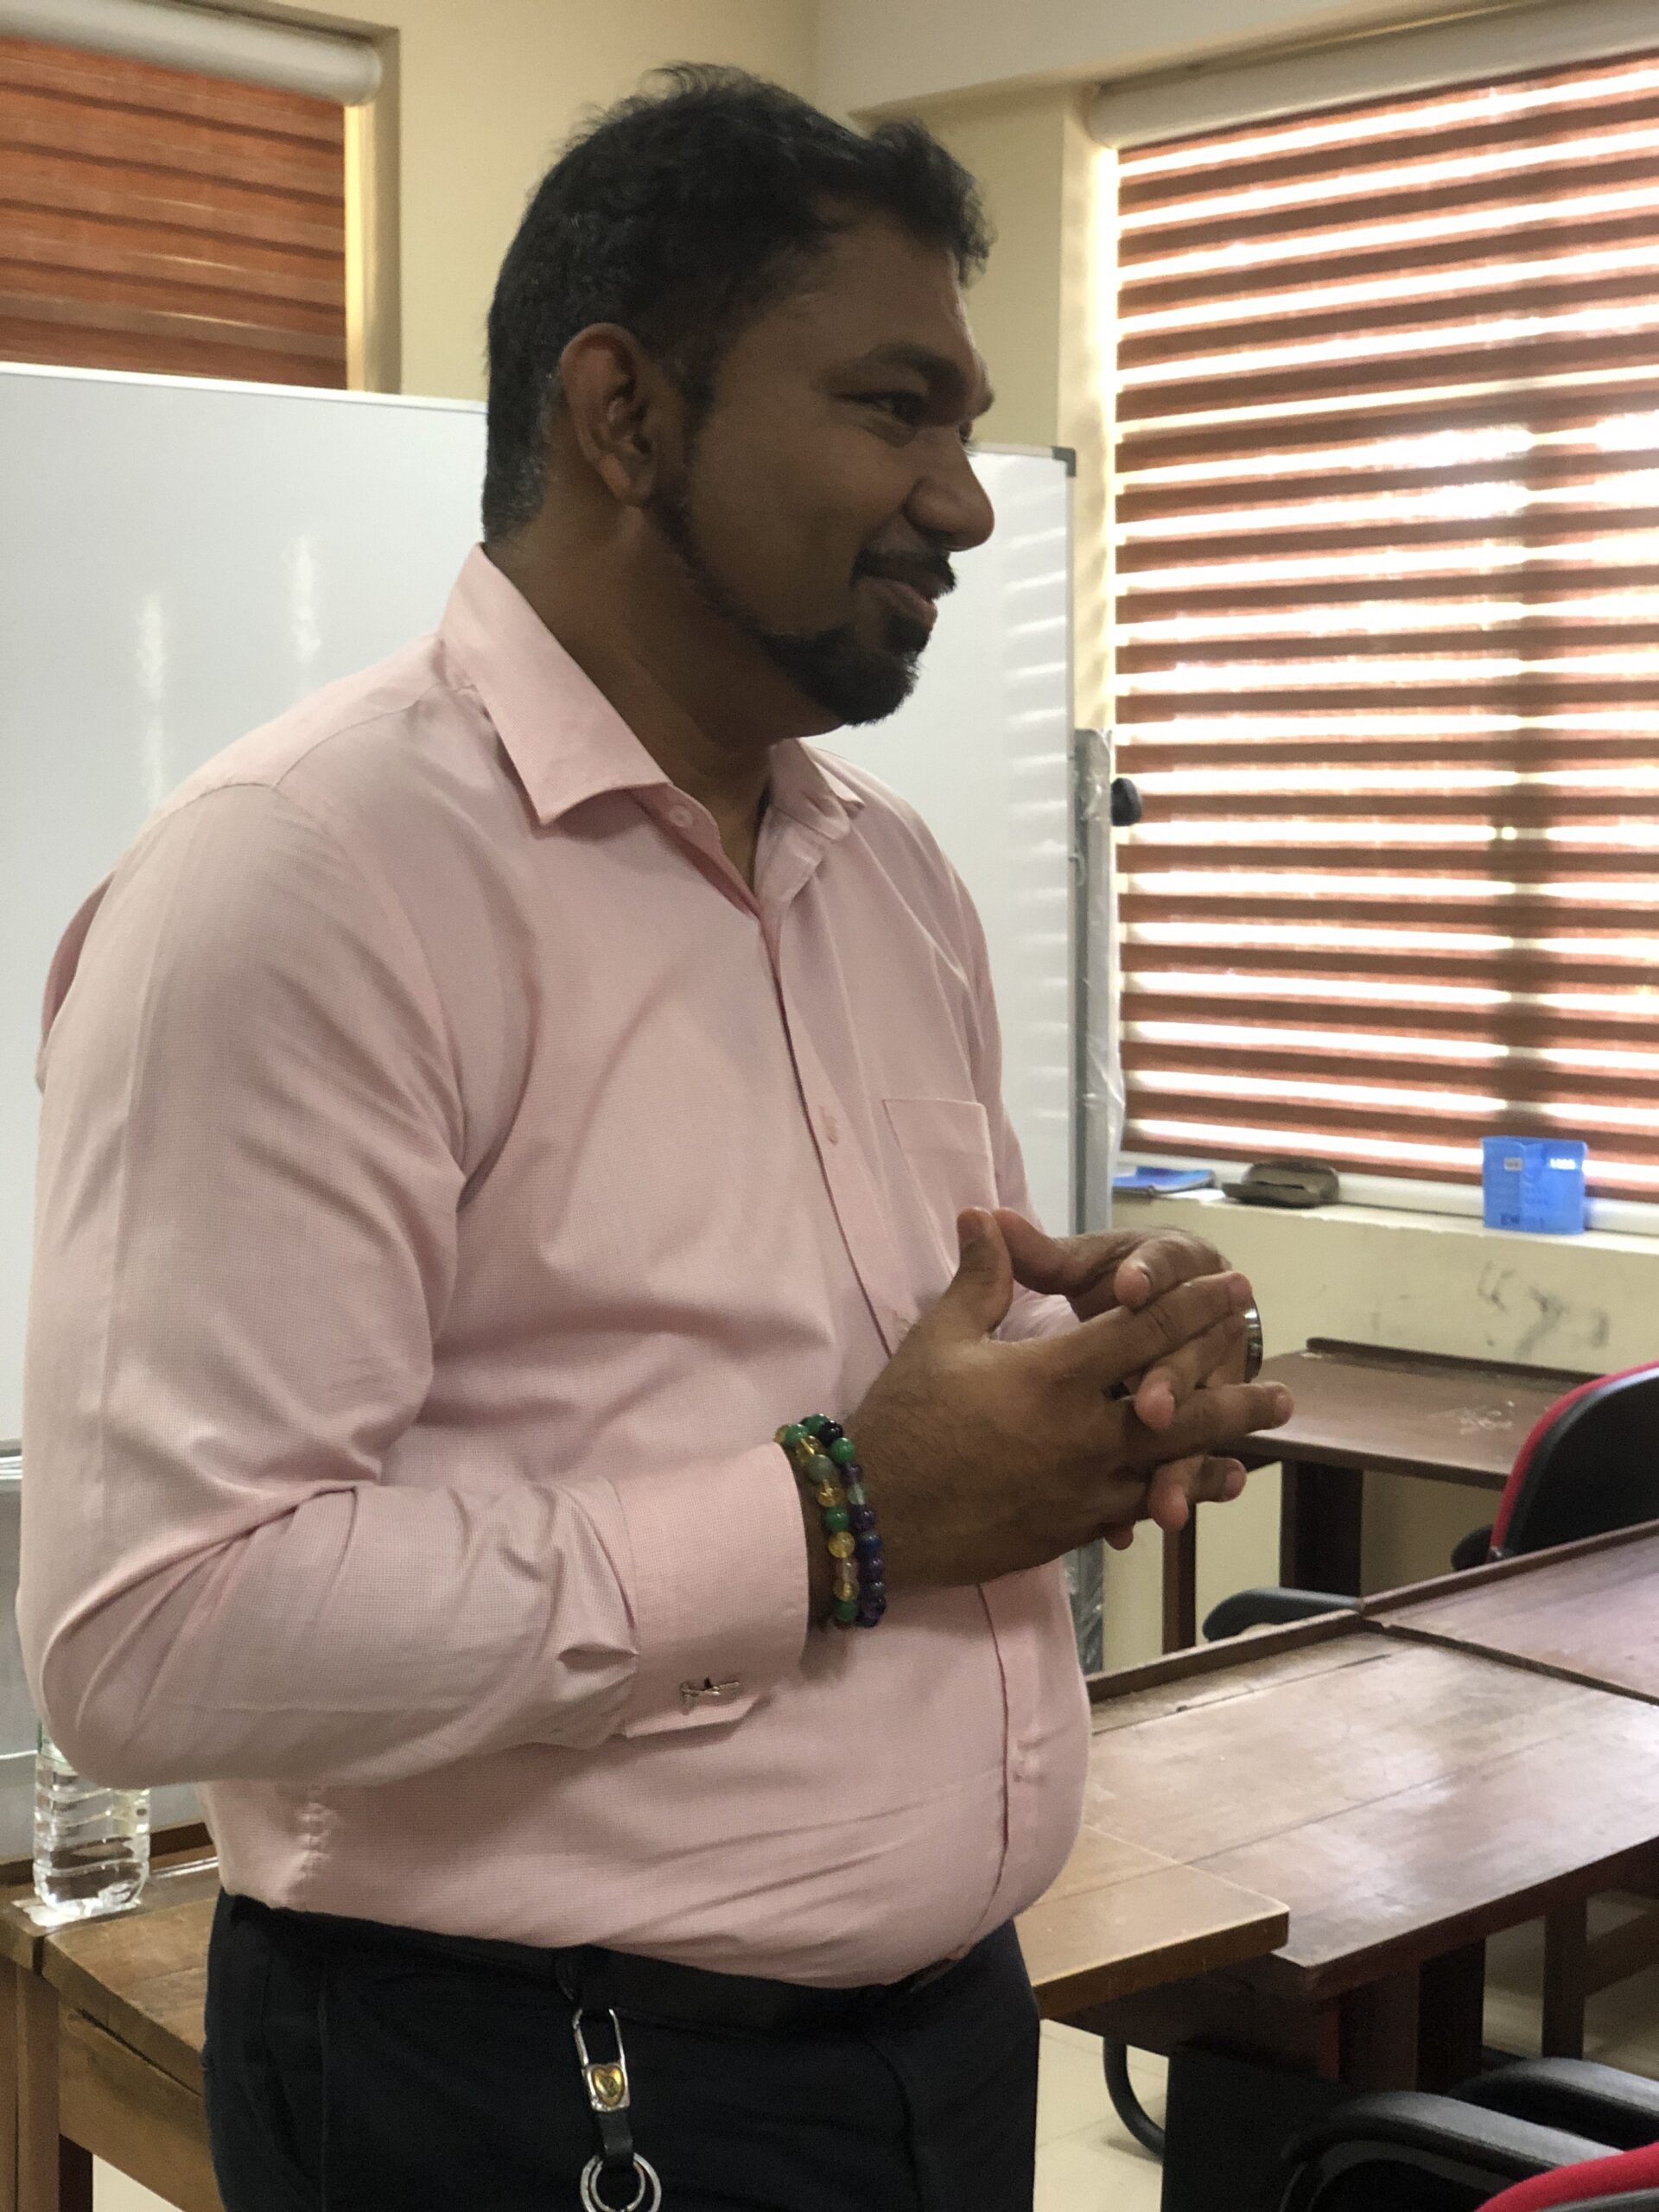 SDP- 24; the 12th Session focused on “student matters” and was conducted by Dr. Rajitha Silva, Senior Student Counsellor of University of Colombo.